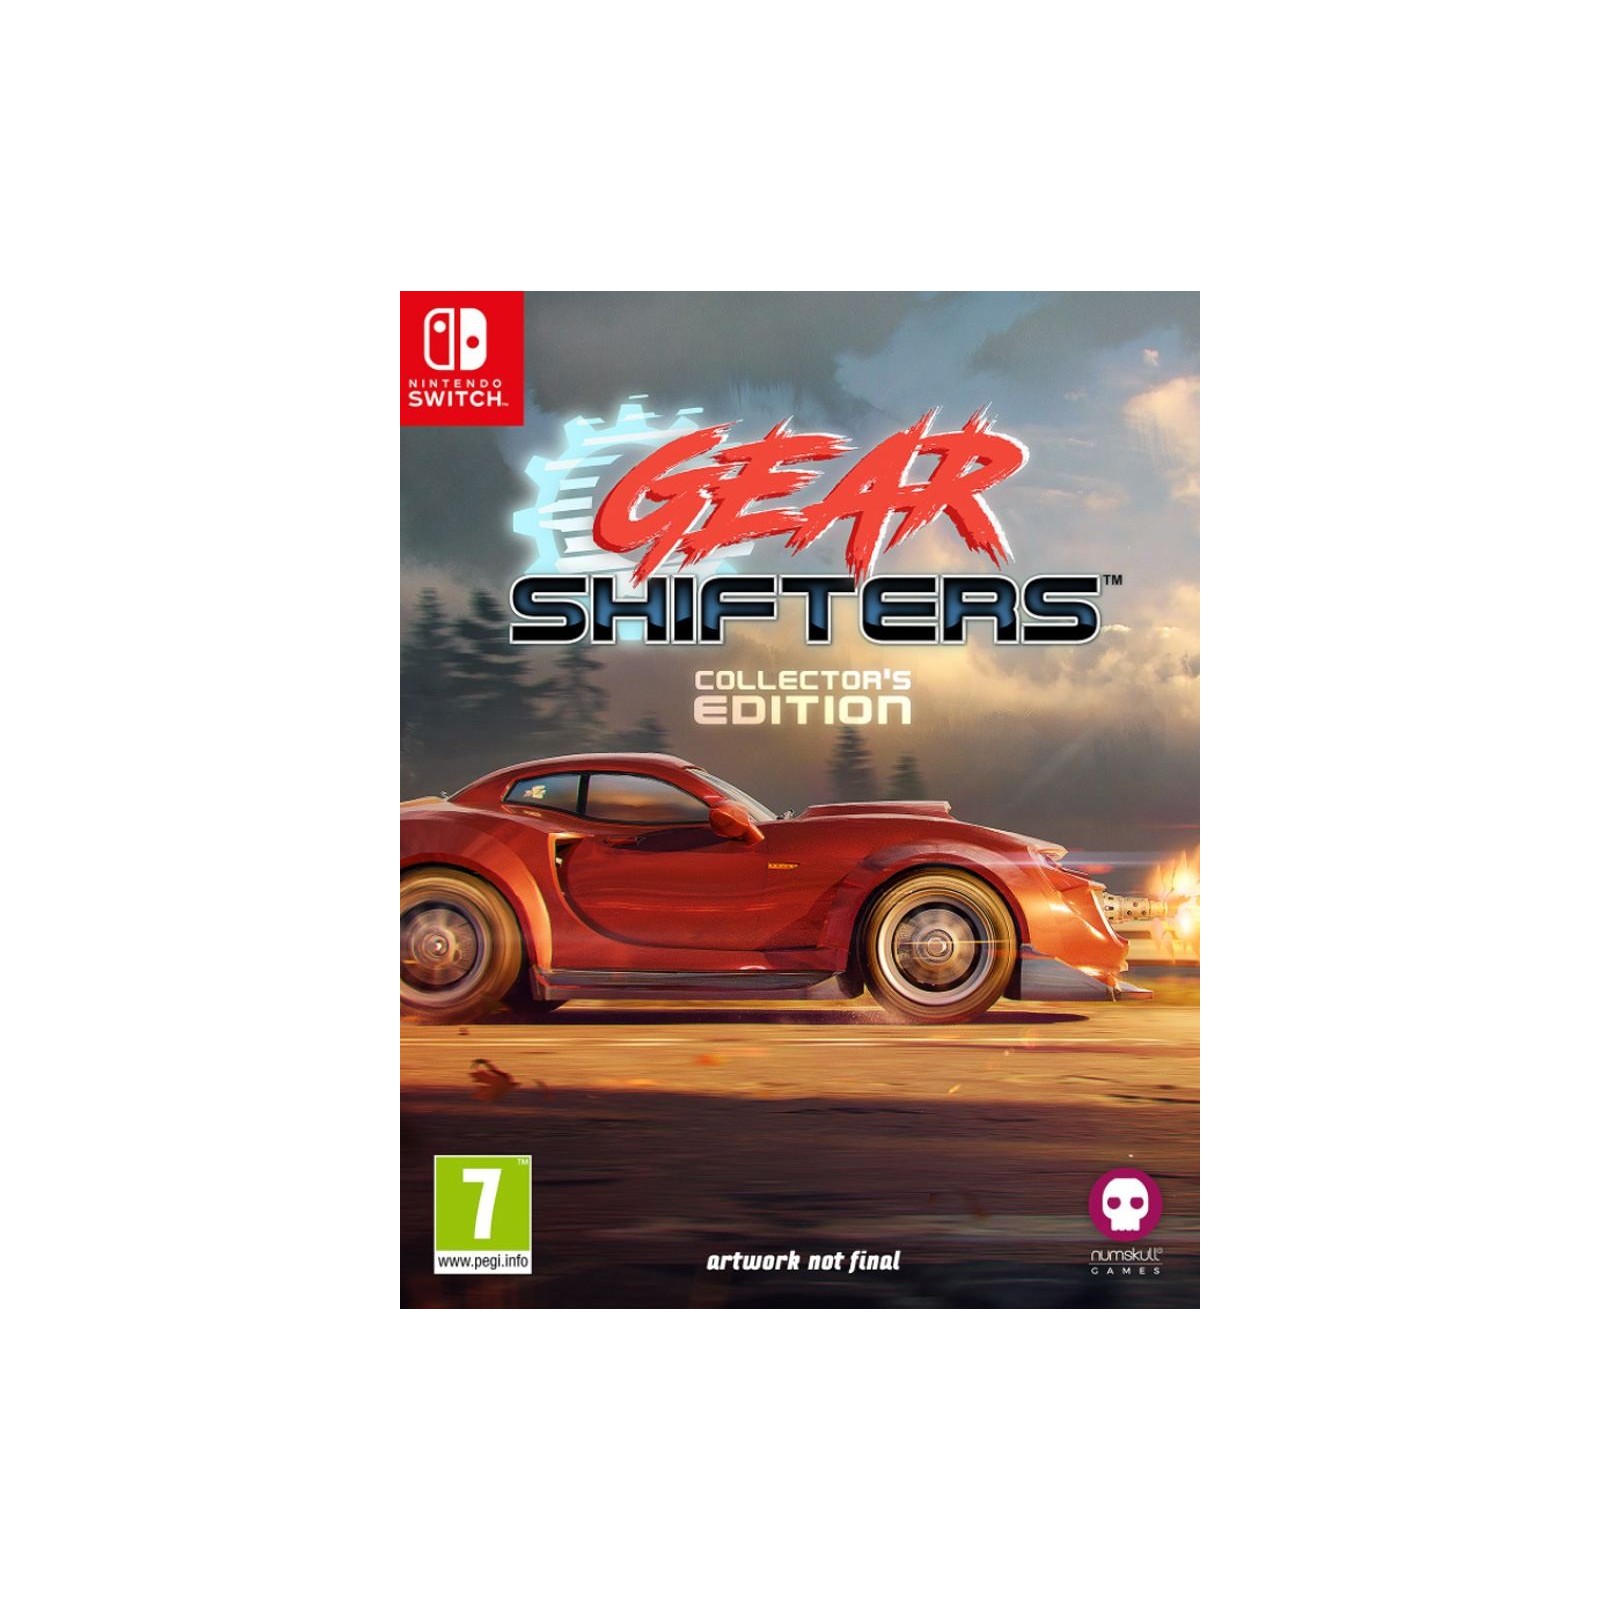 Gearshifters (Collector's Edition)